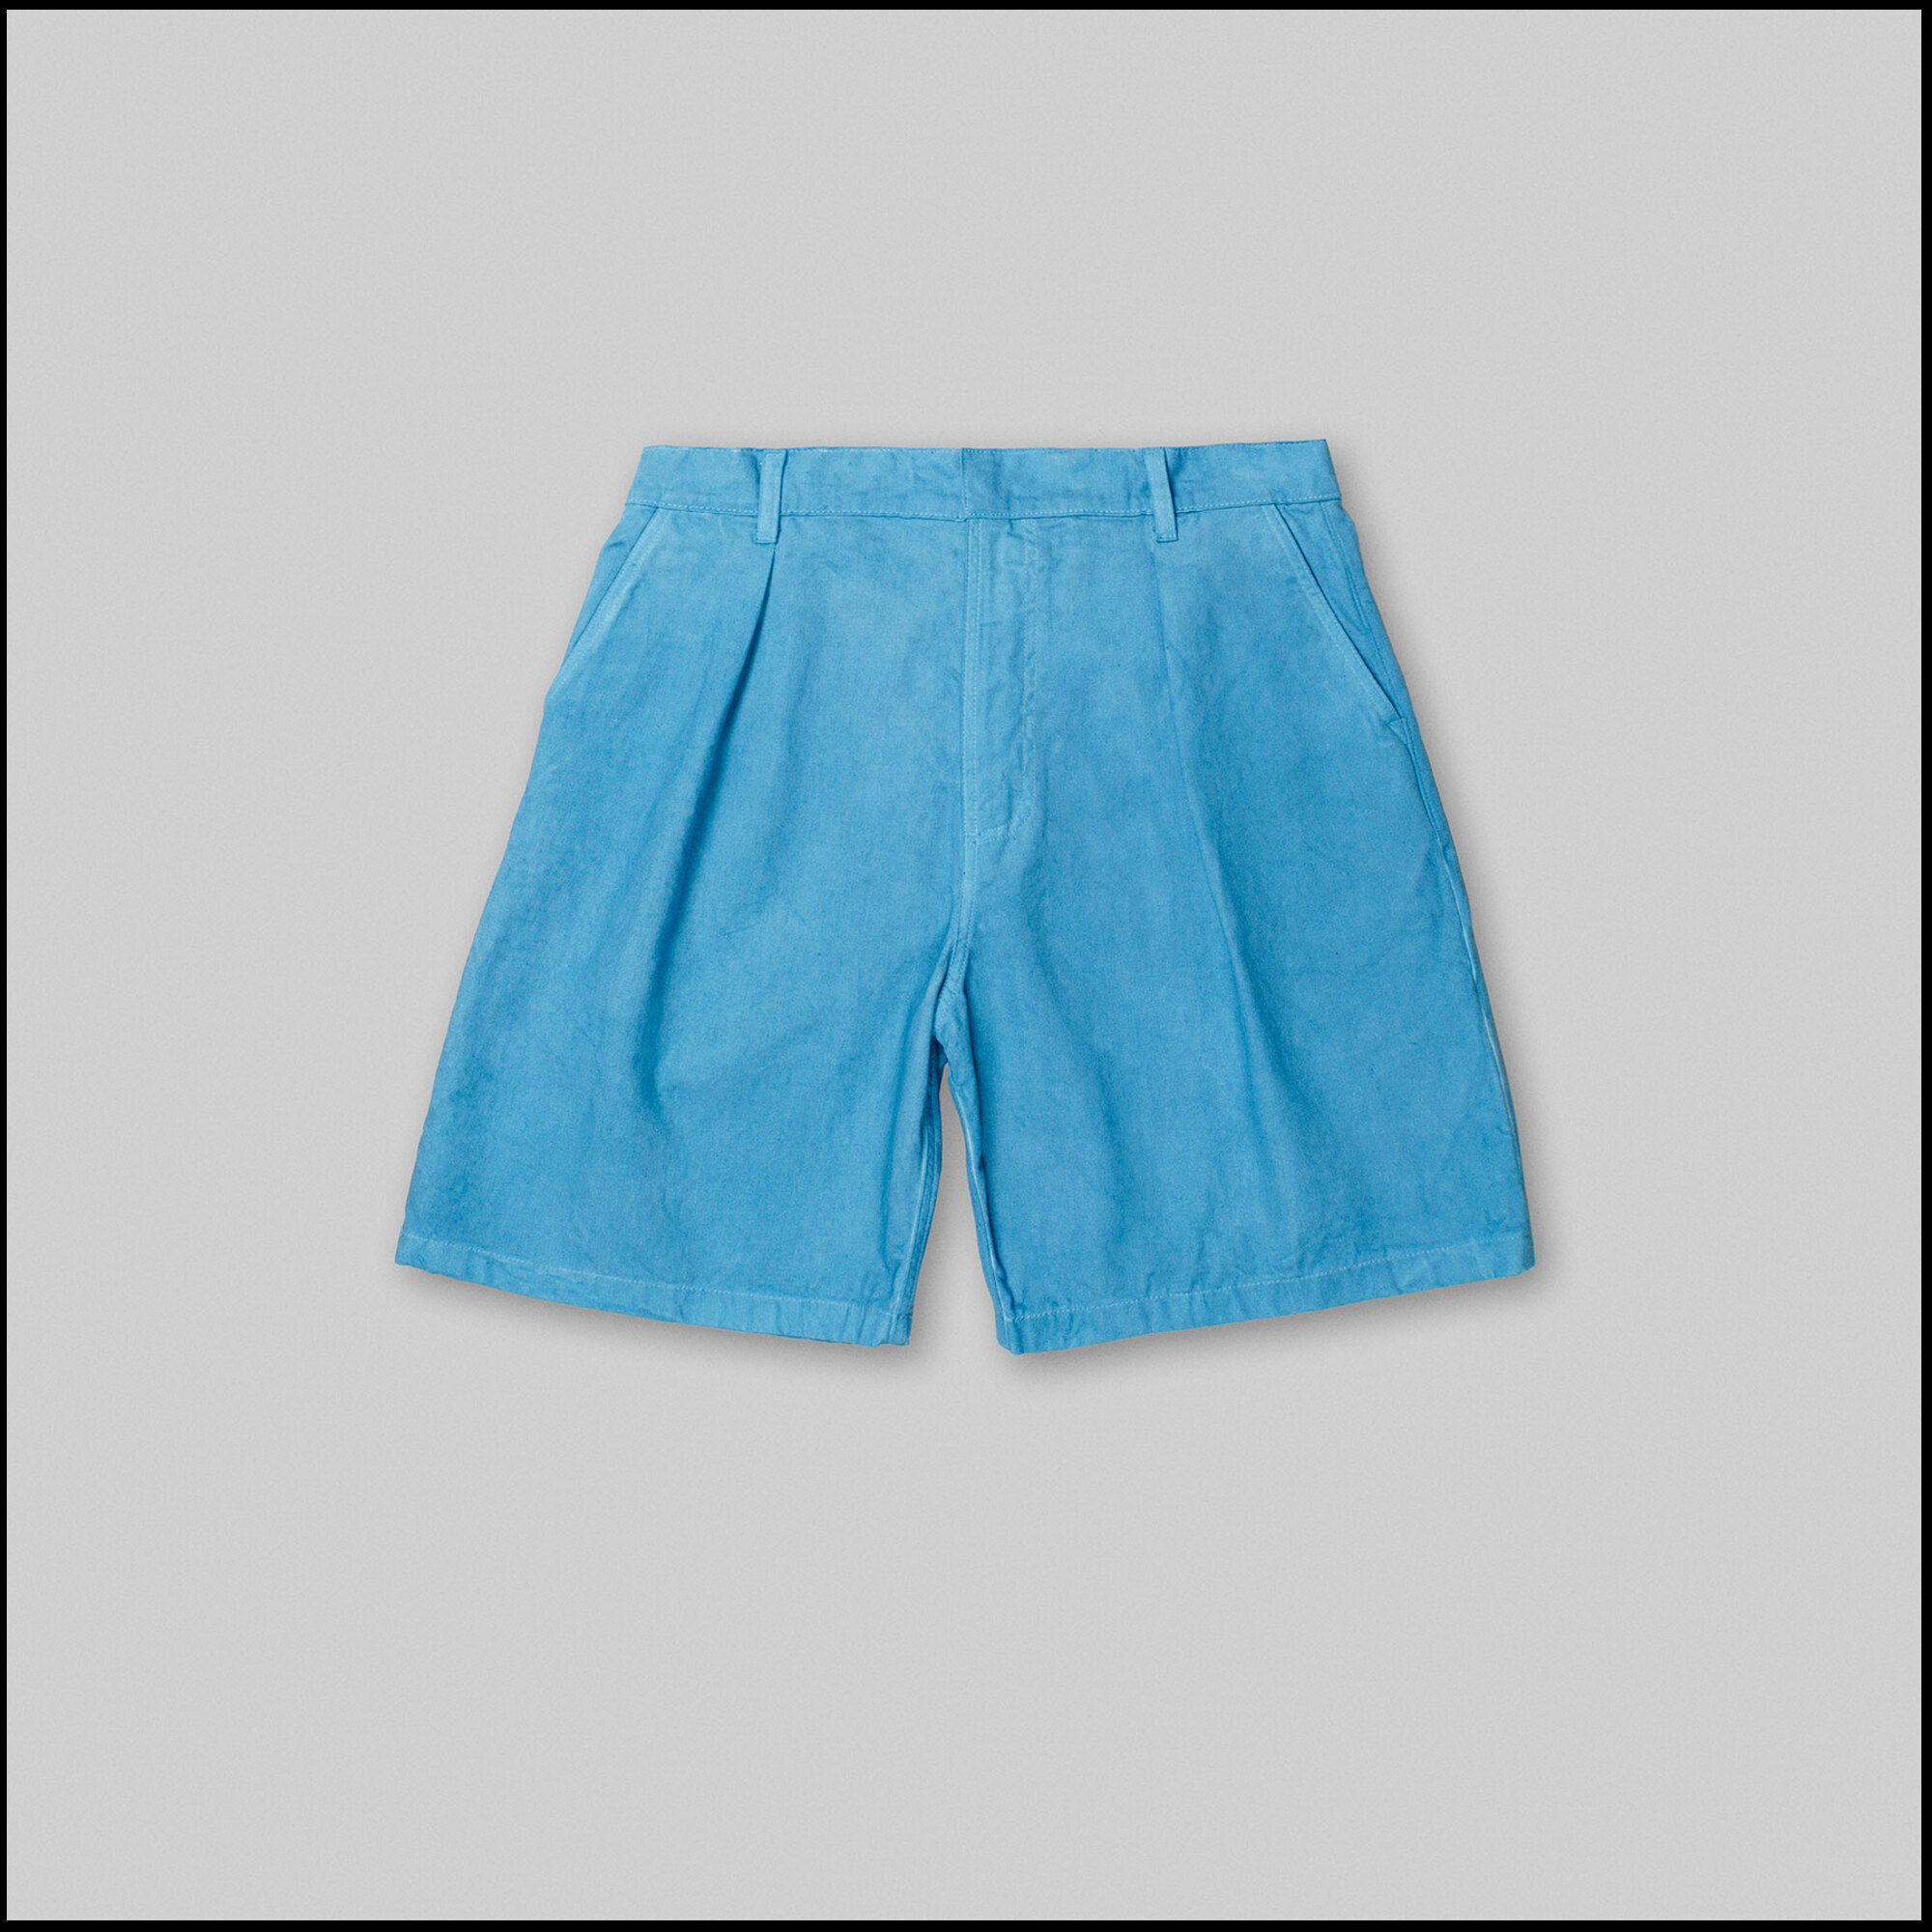 PAGE shorts by Arpenteur in Ice woad color